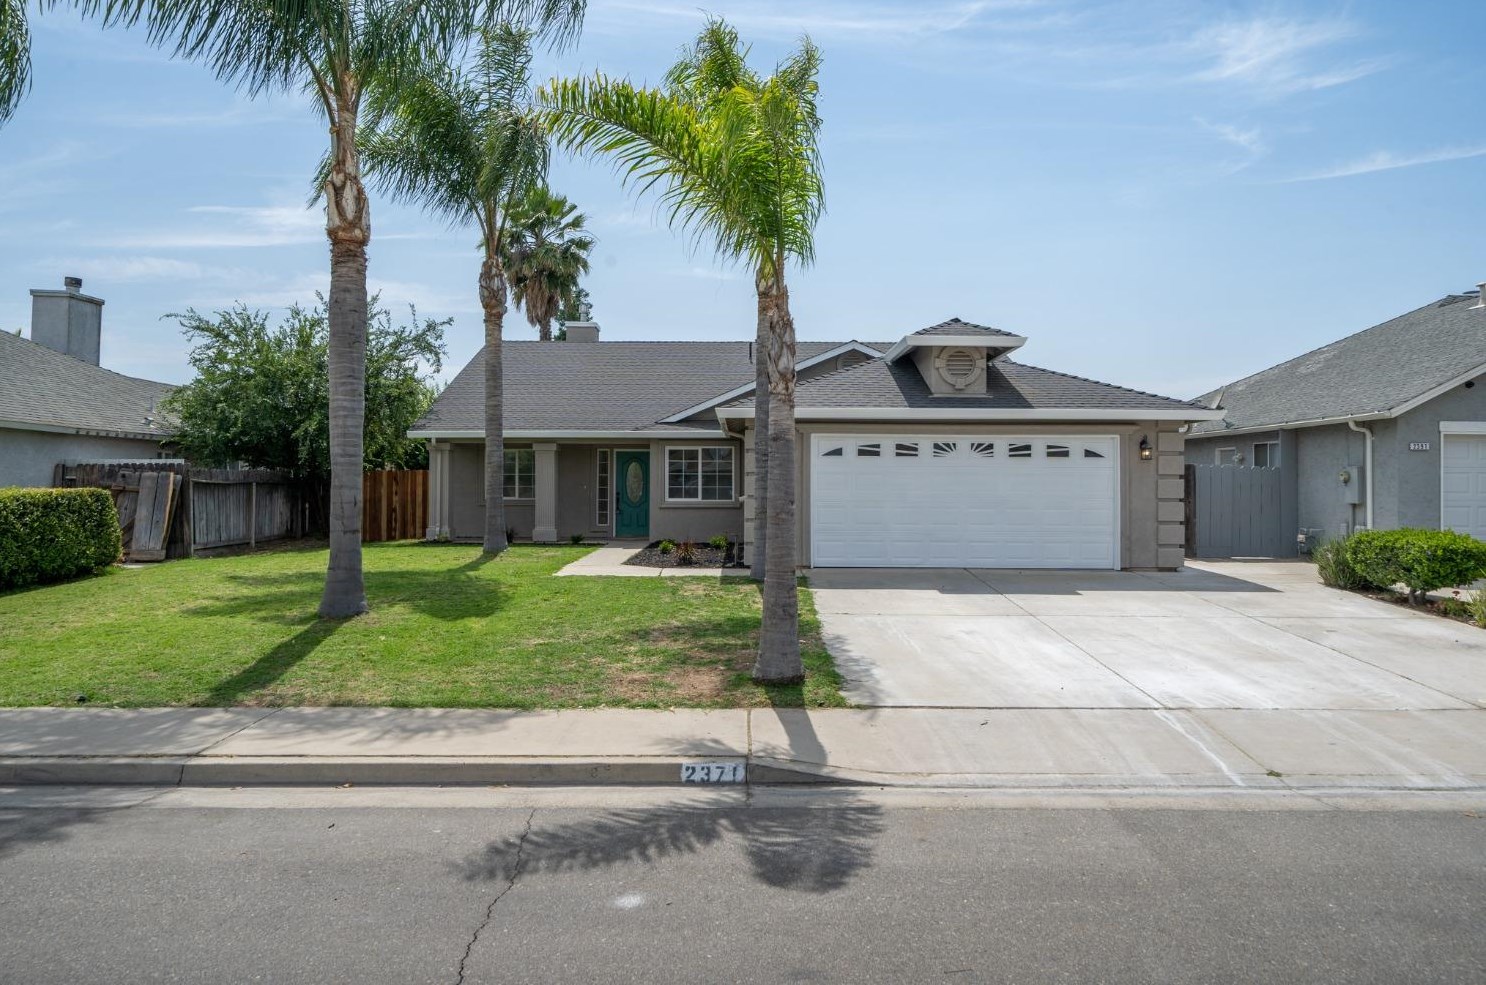 2371 7th St, Atwater, CA 95301-3348